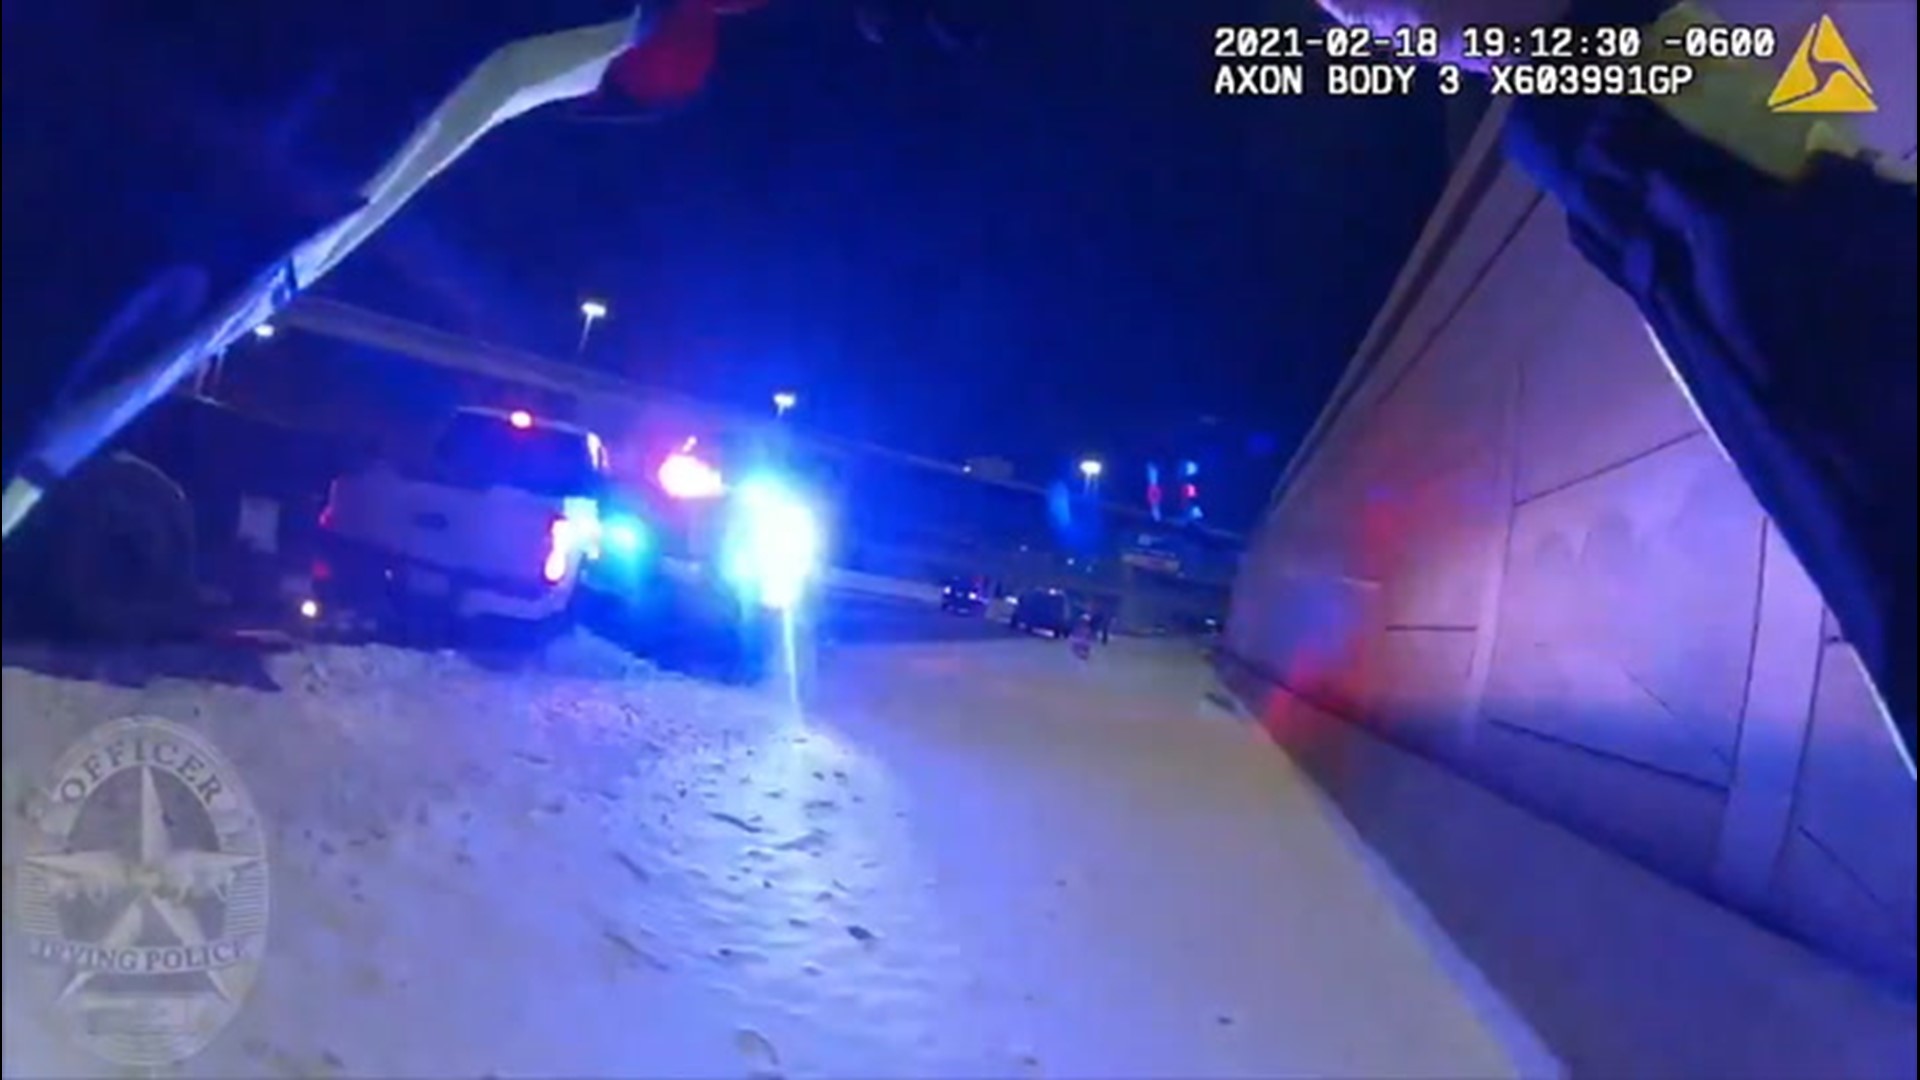 On the night of Feb. 18, an officer with the Irving Police Department saw his cruiser hit not once, but twice, as vehicles lost control in icy conditions.